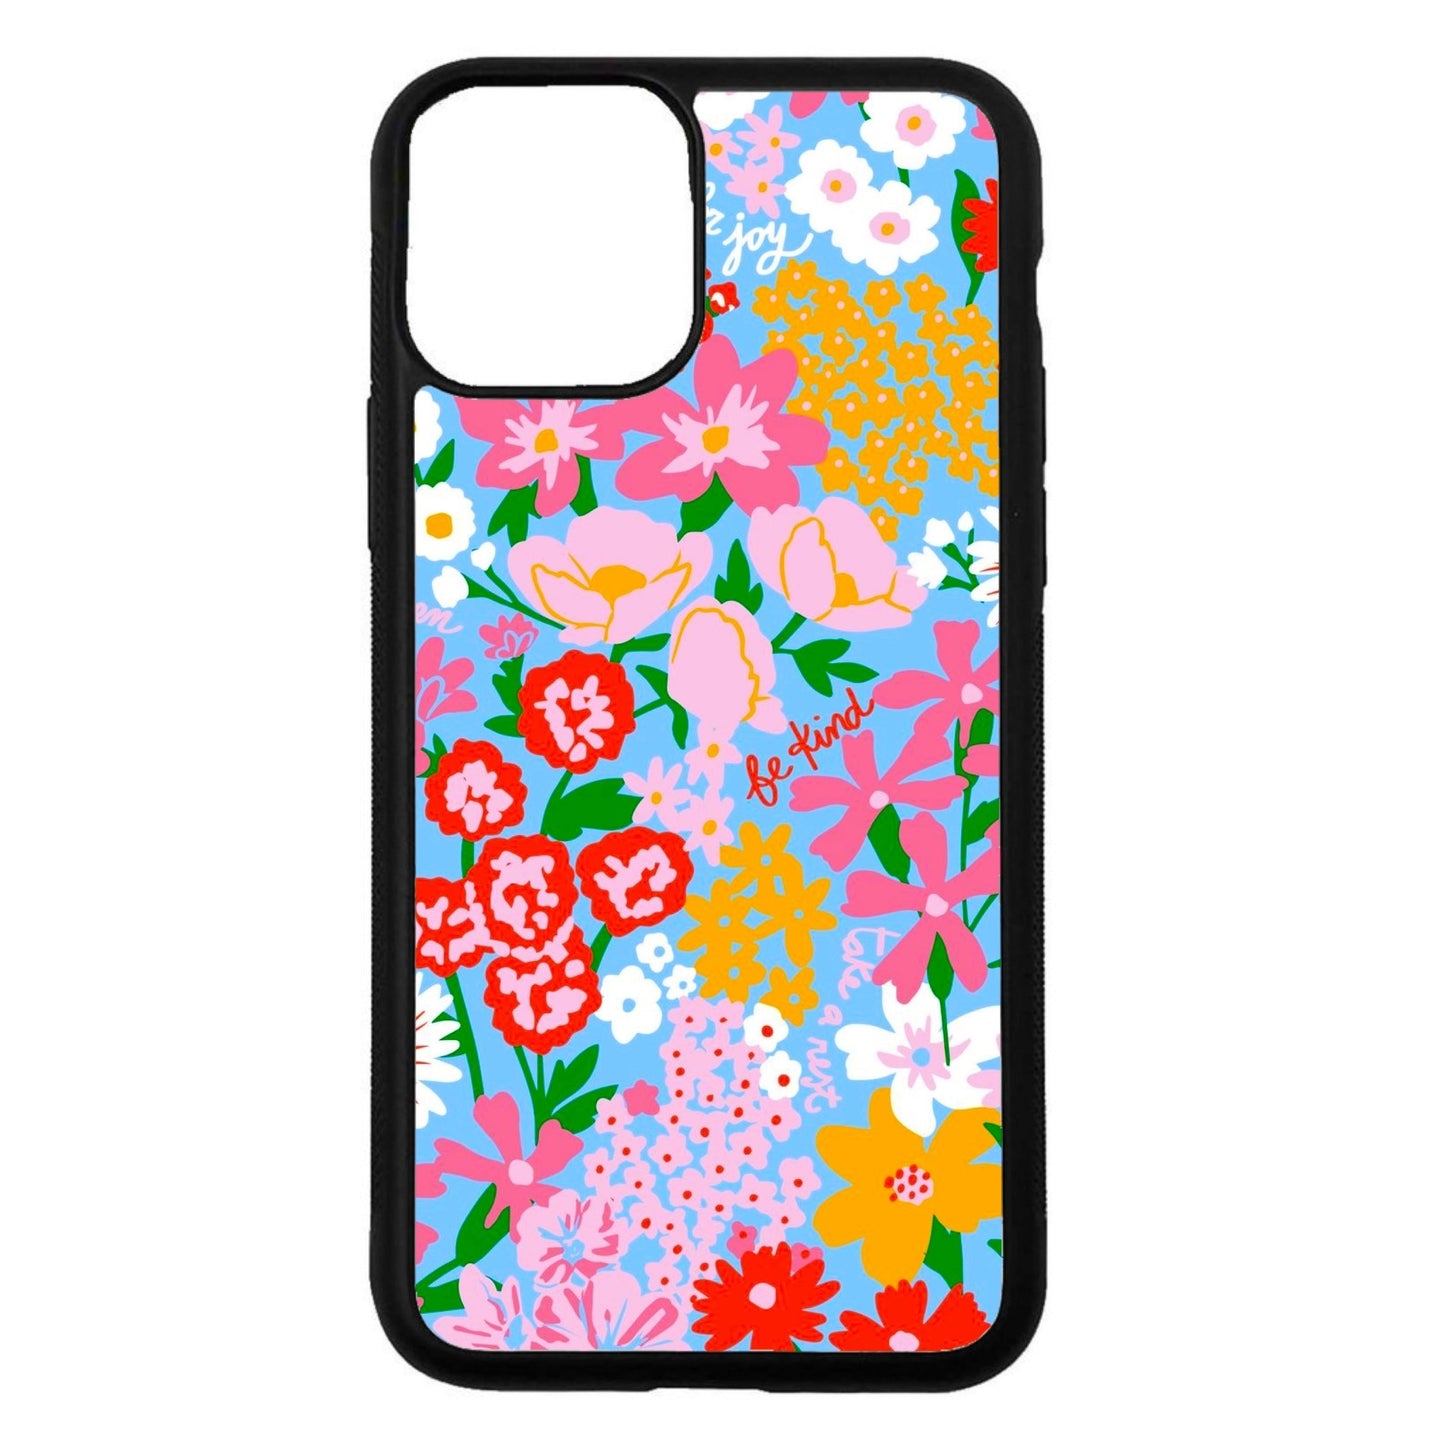 be kind - Mai Cases